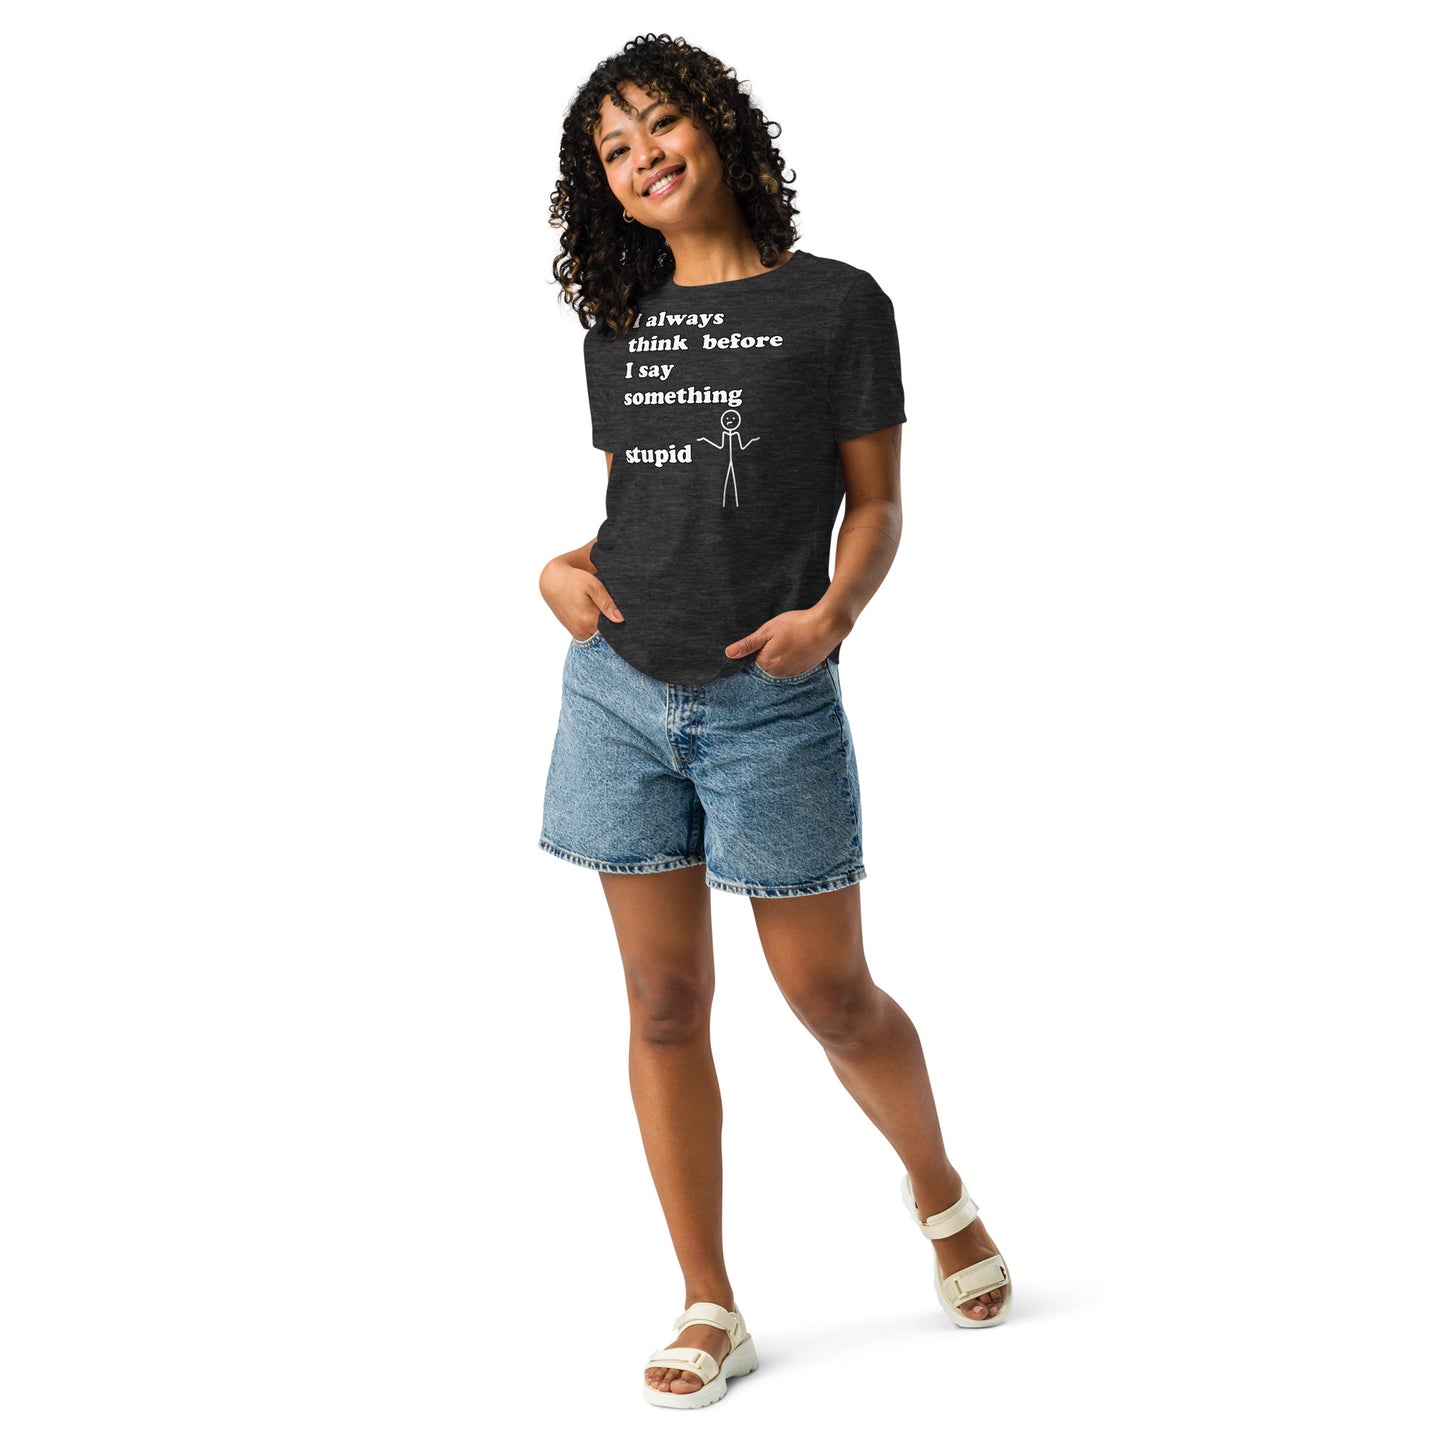 Woman with dark grey t-shirt with text "I always think before I say something stupid"